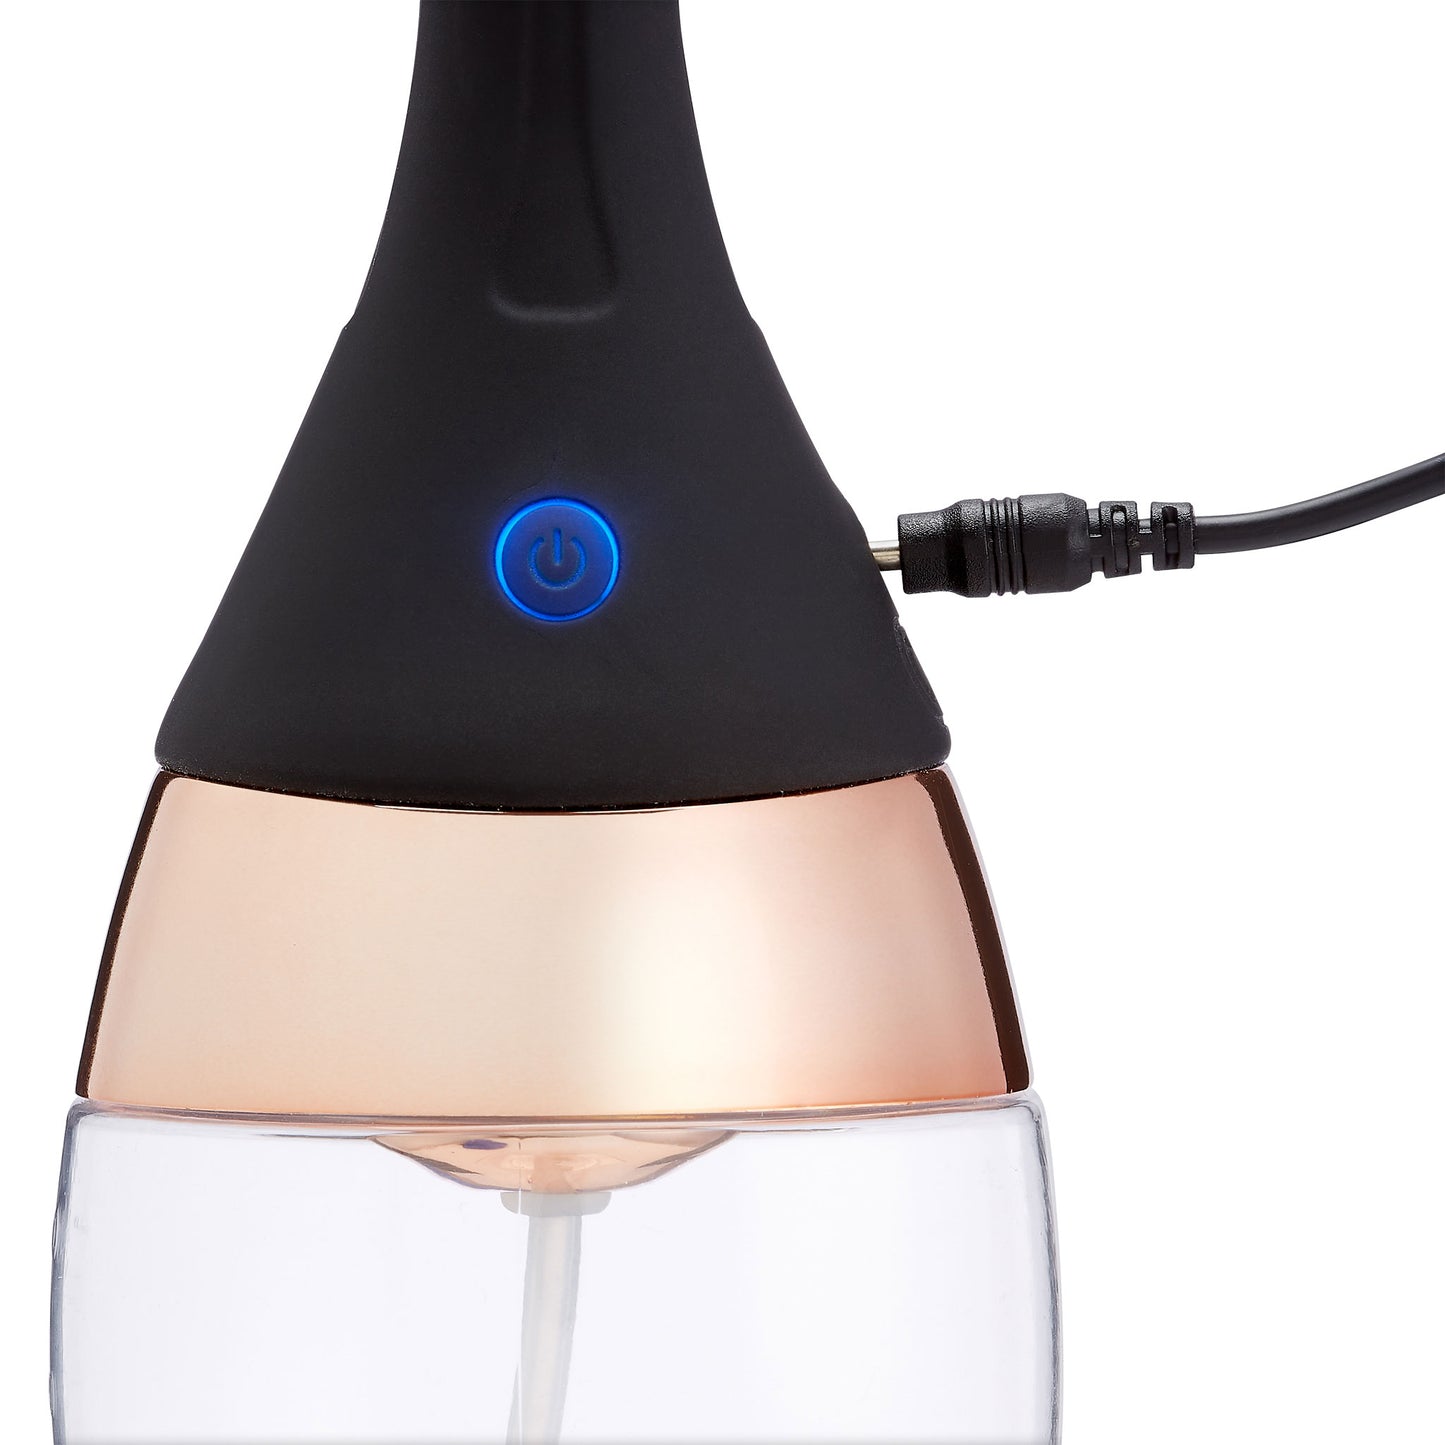 Health and Wellness Rechargeable Enema / Douche With Built-in Cleansing Pump